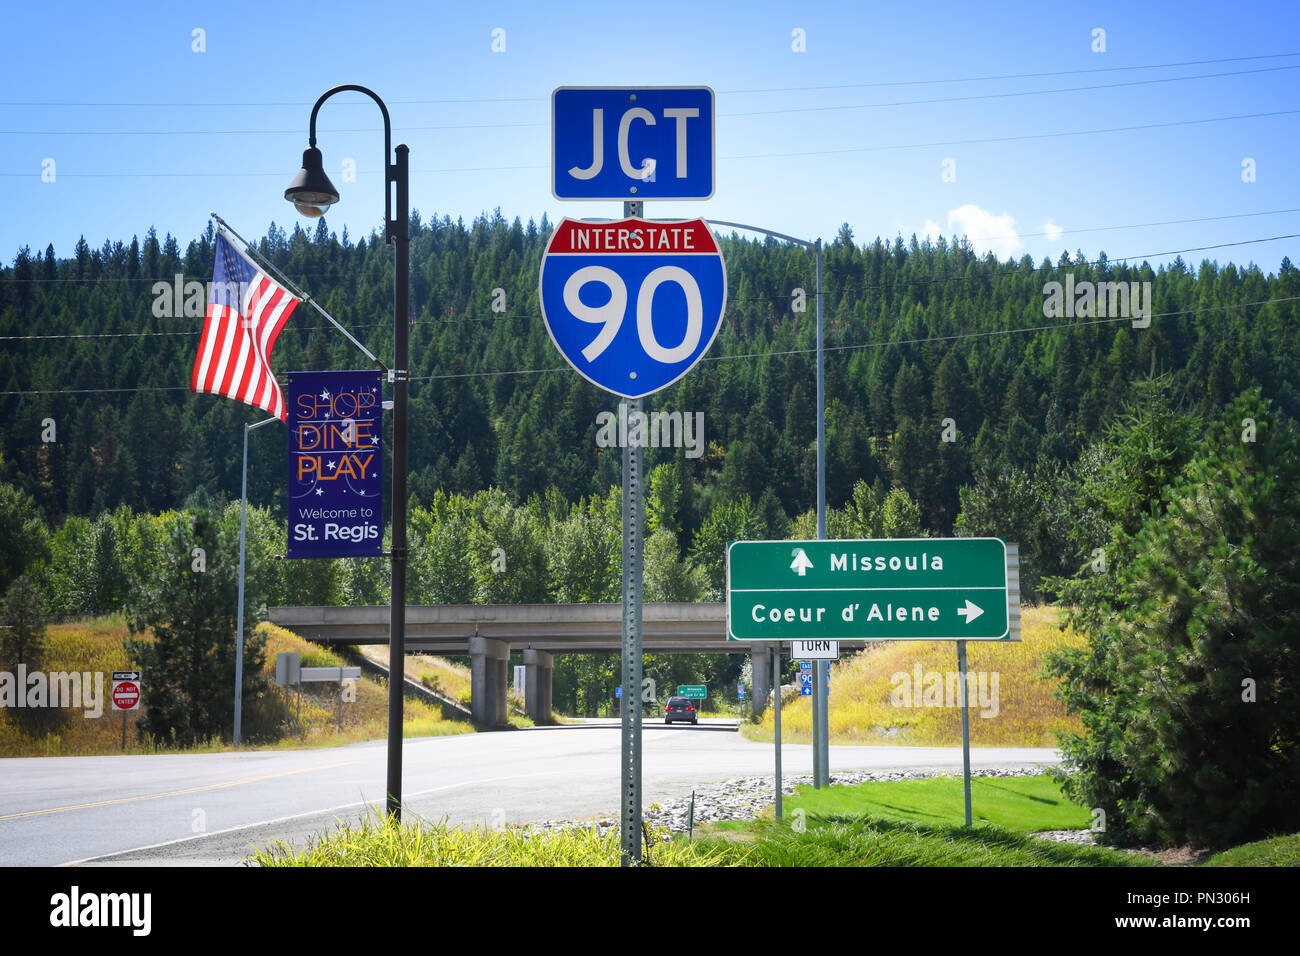 ST. REGIS, MONTANA, USA: September 1, 2018: An American flag and road and welcome signs at the juntion of Interstate 90 and Montana Highway 135 Stock Photo